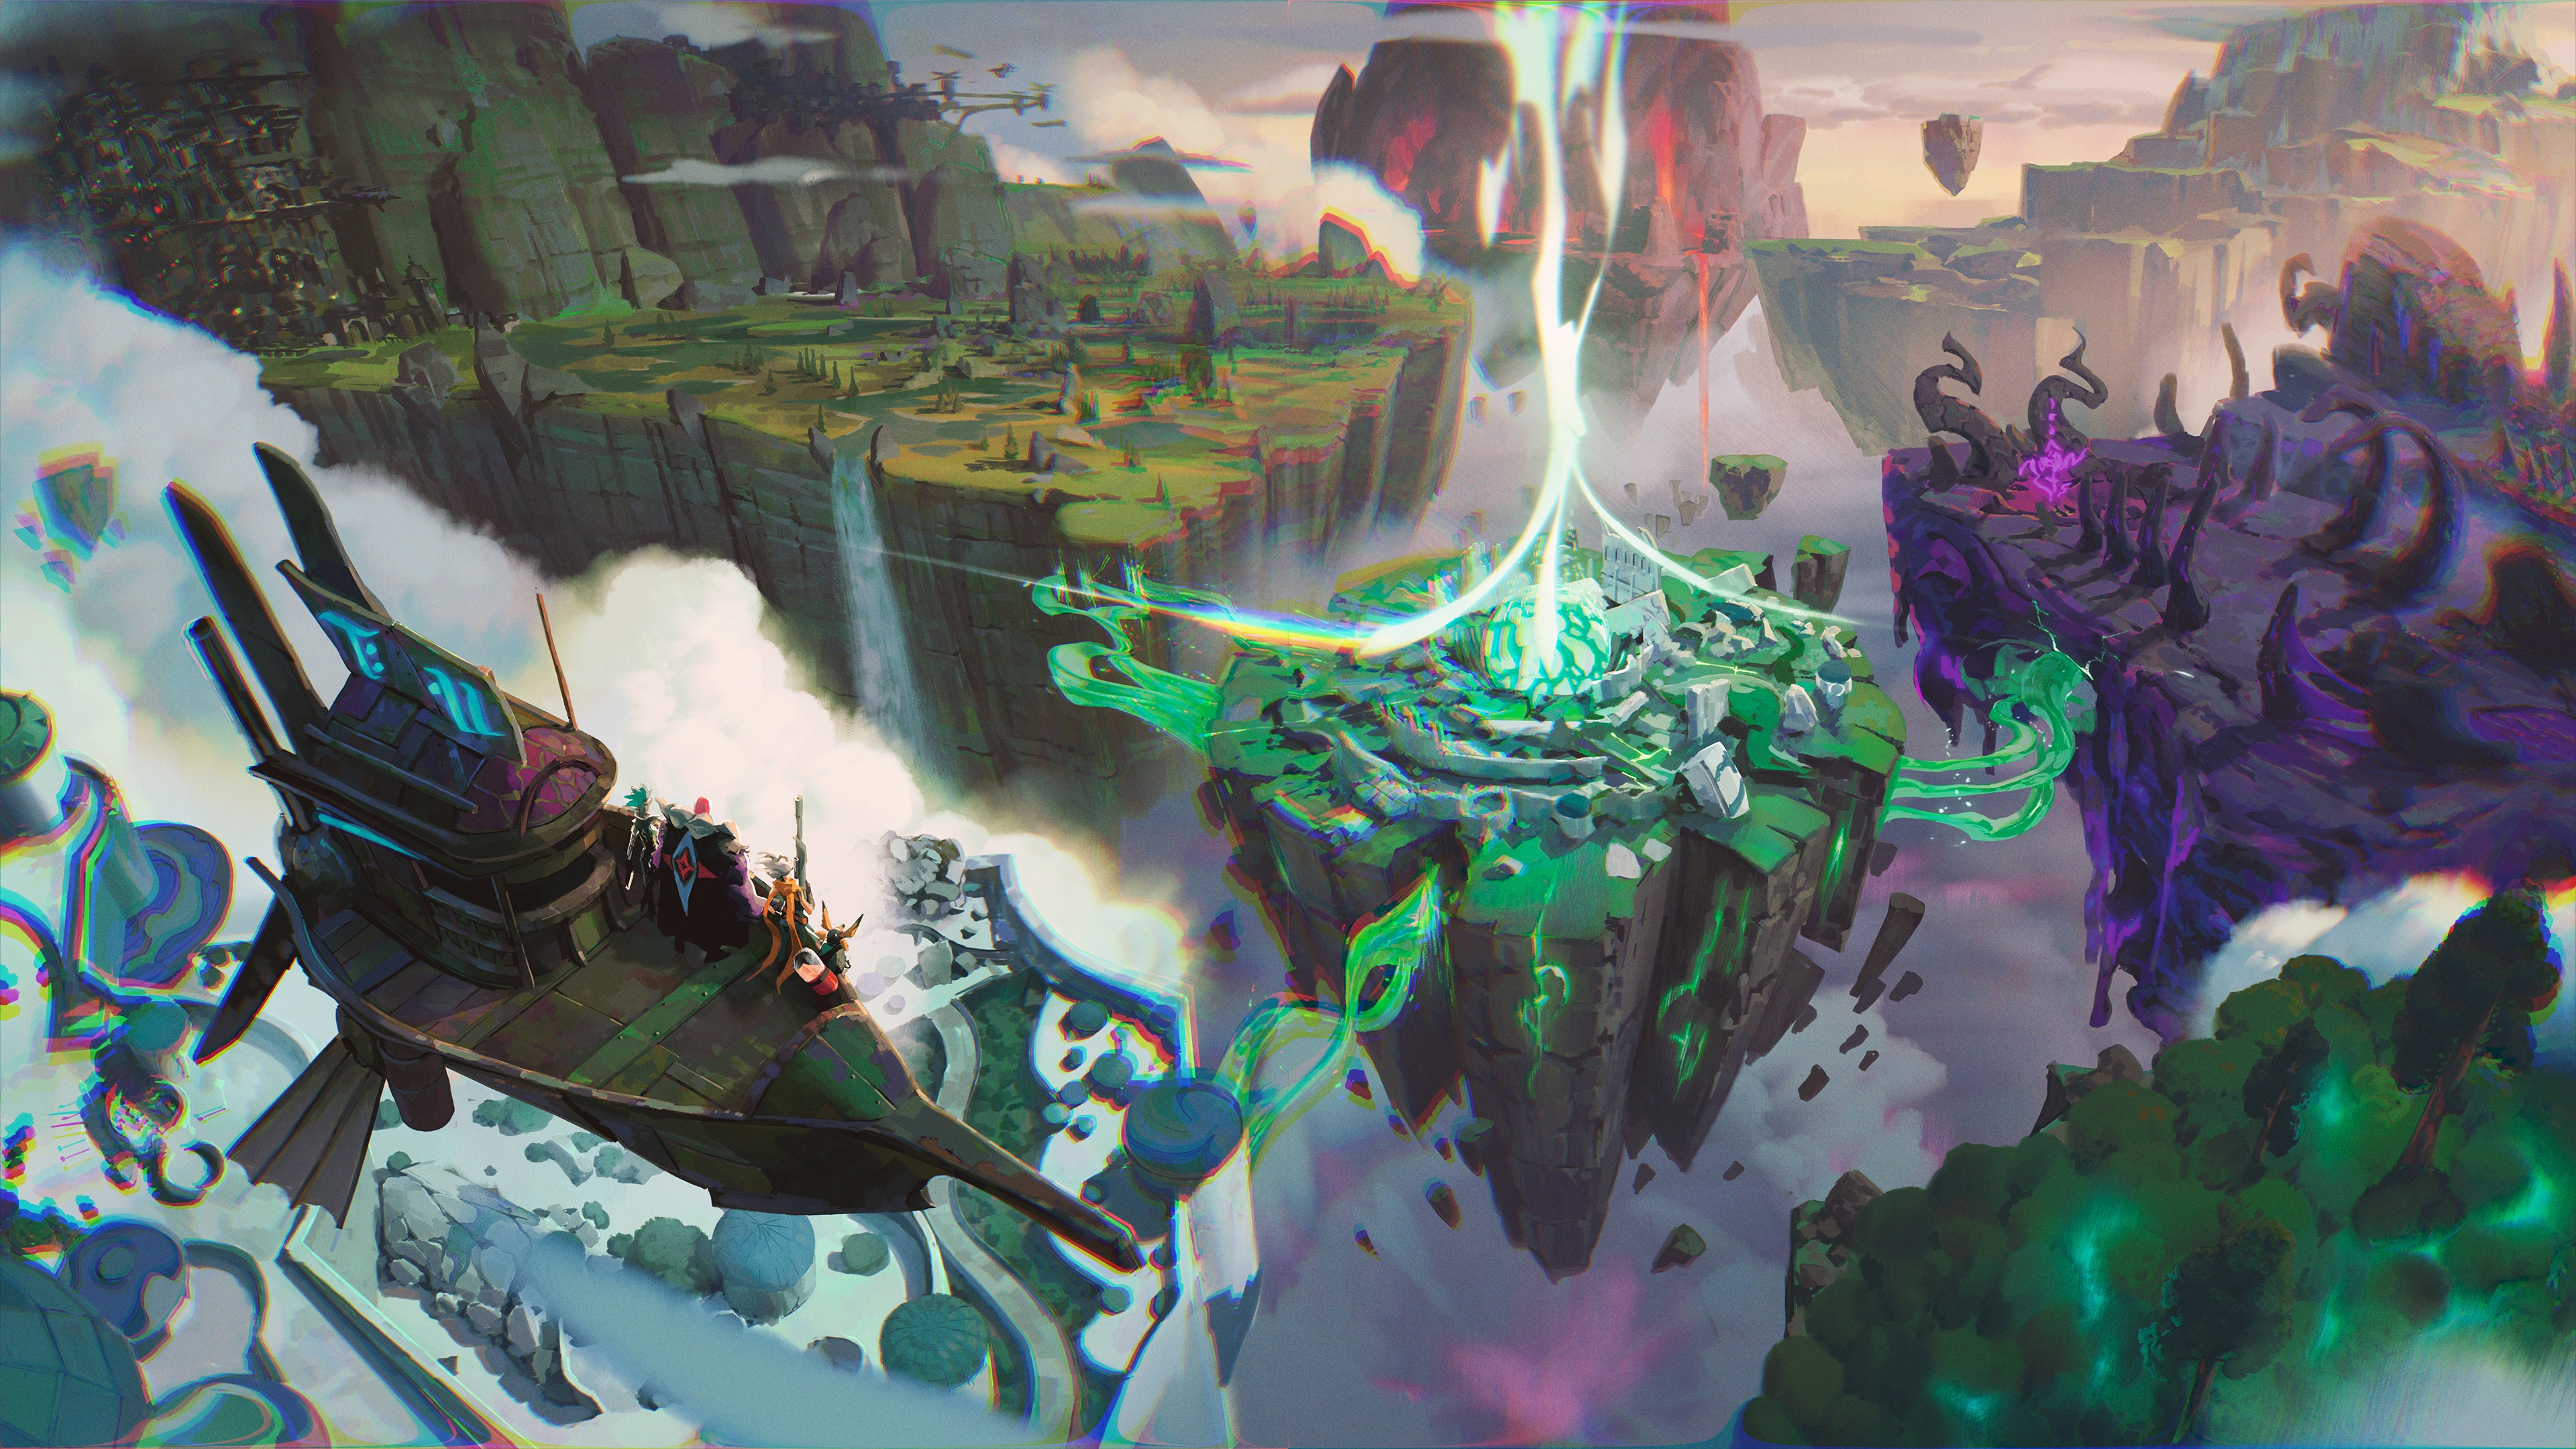 A colorful and fantastical landscape of flying ships and floating islands in concept art for Project Loki from Theorycraft Games.